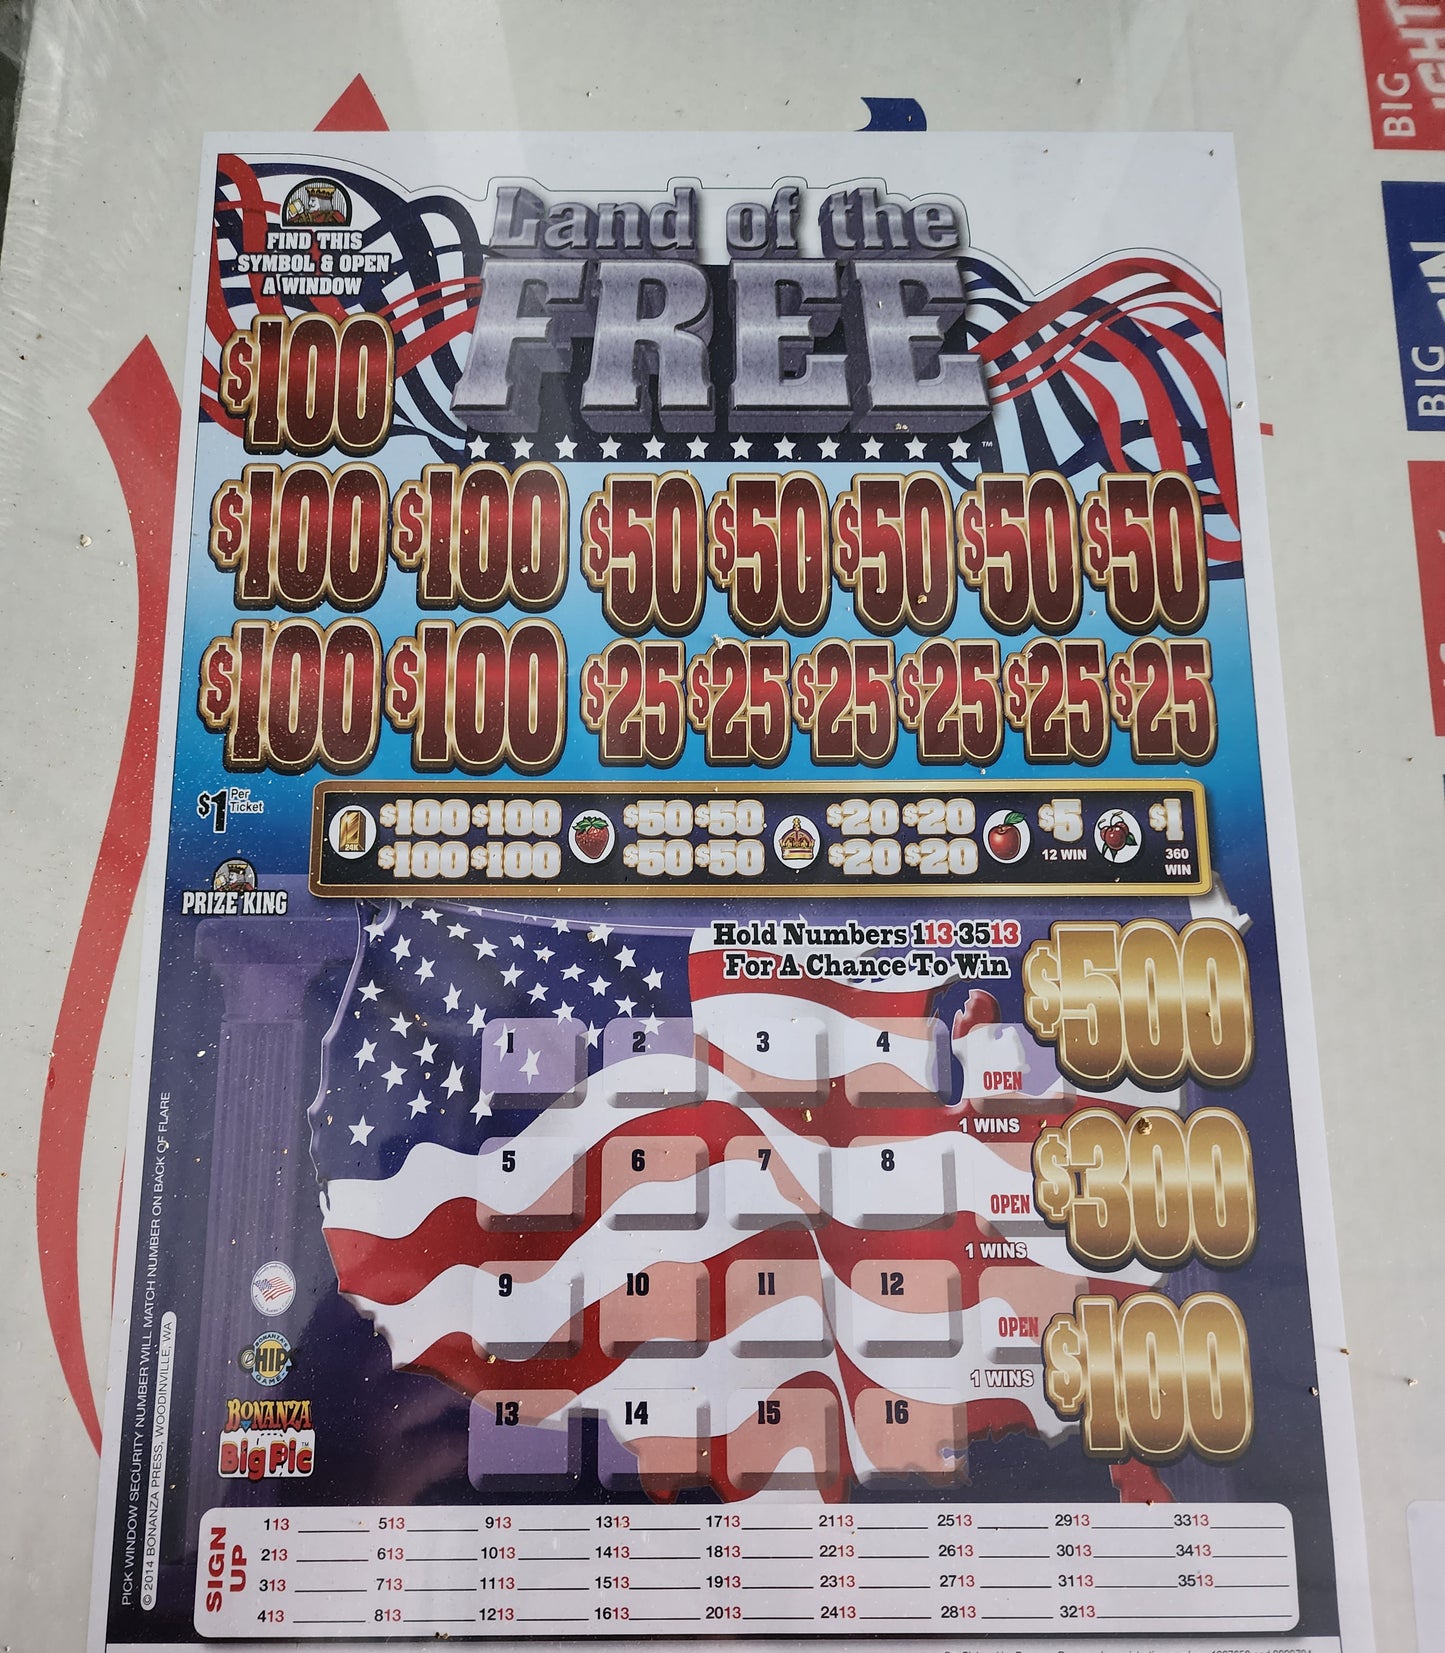 LAND OF THE FREE CHIPS CASHBOARD